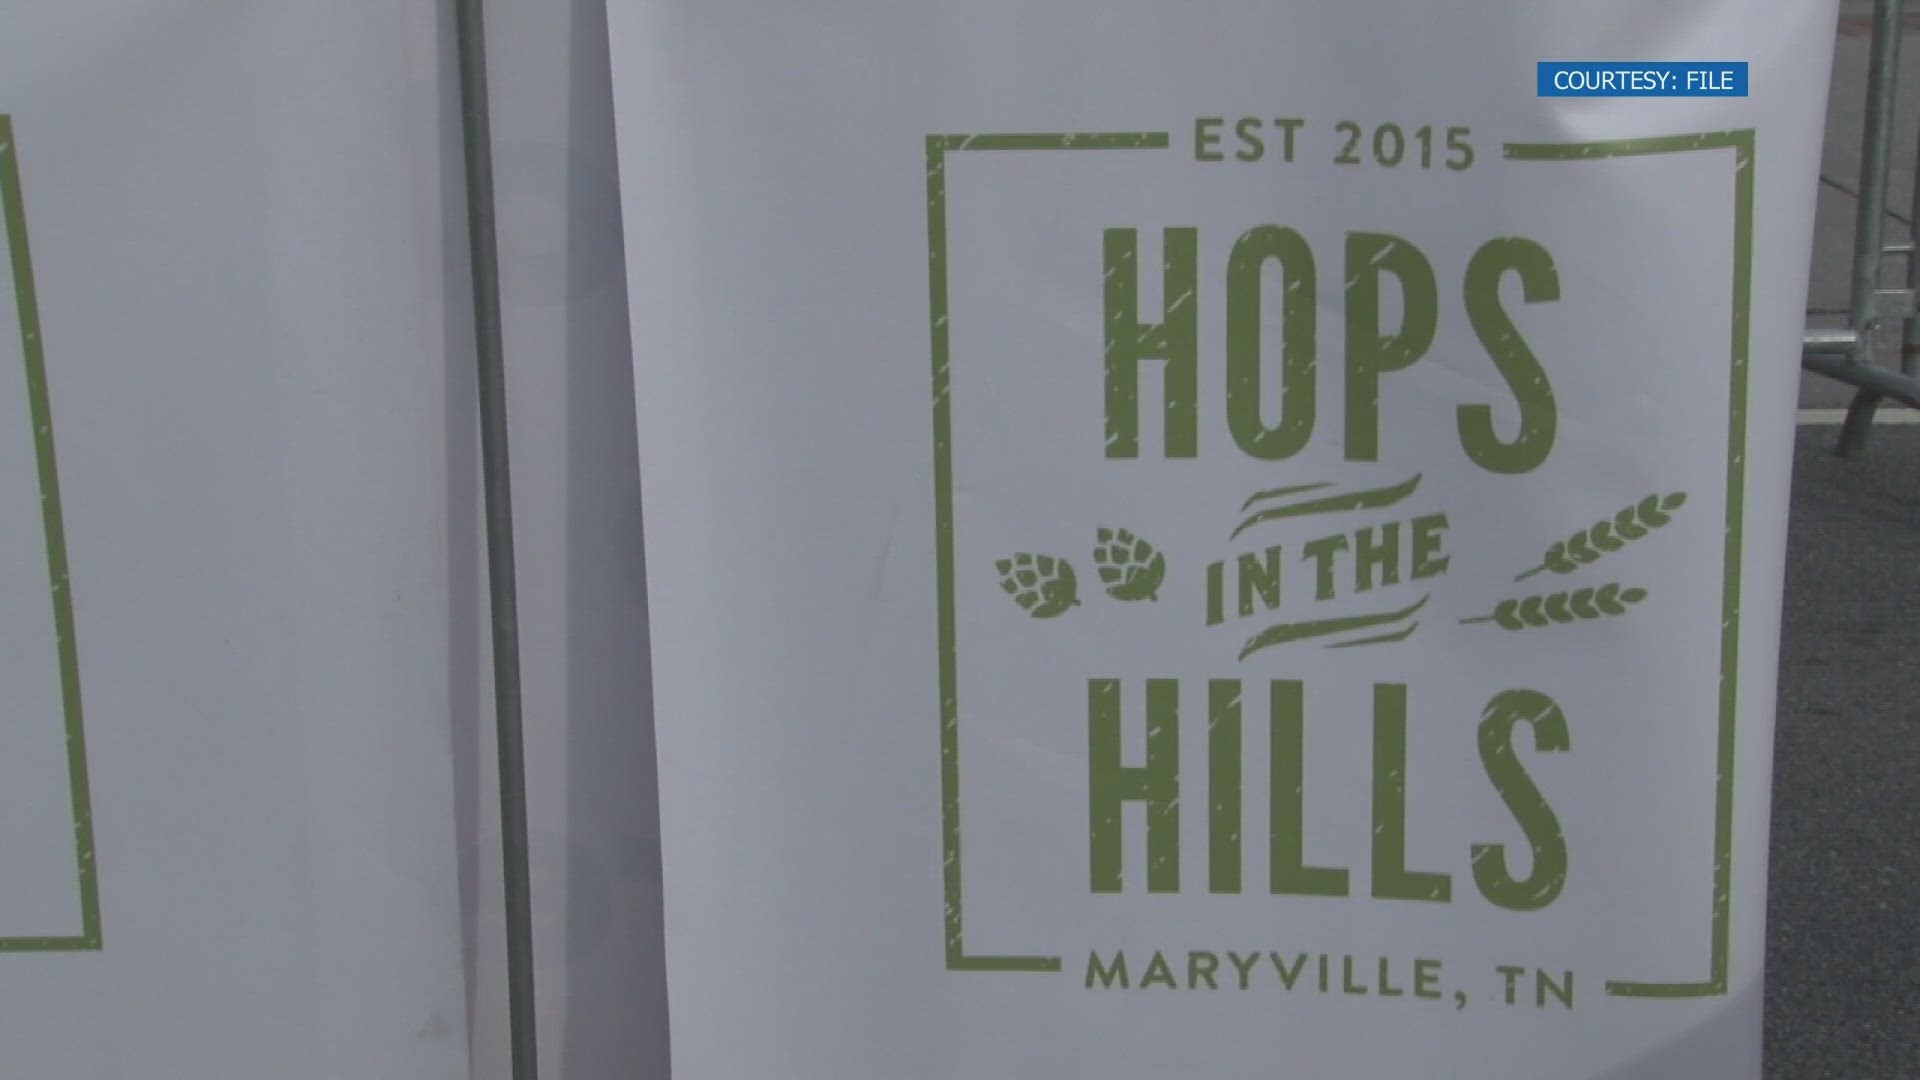 Hops in the Hills has been a staple summer event for the Maryville community since 2015. The festival is set for Friday, June 20.